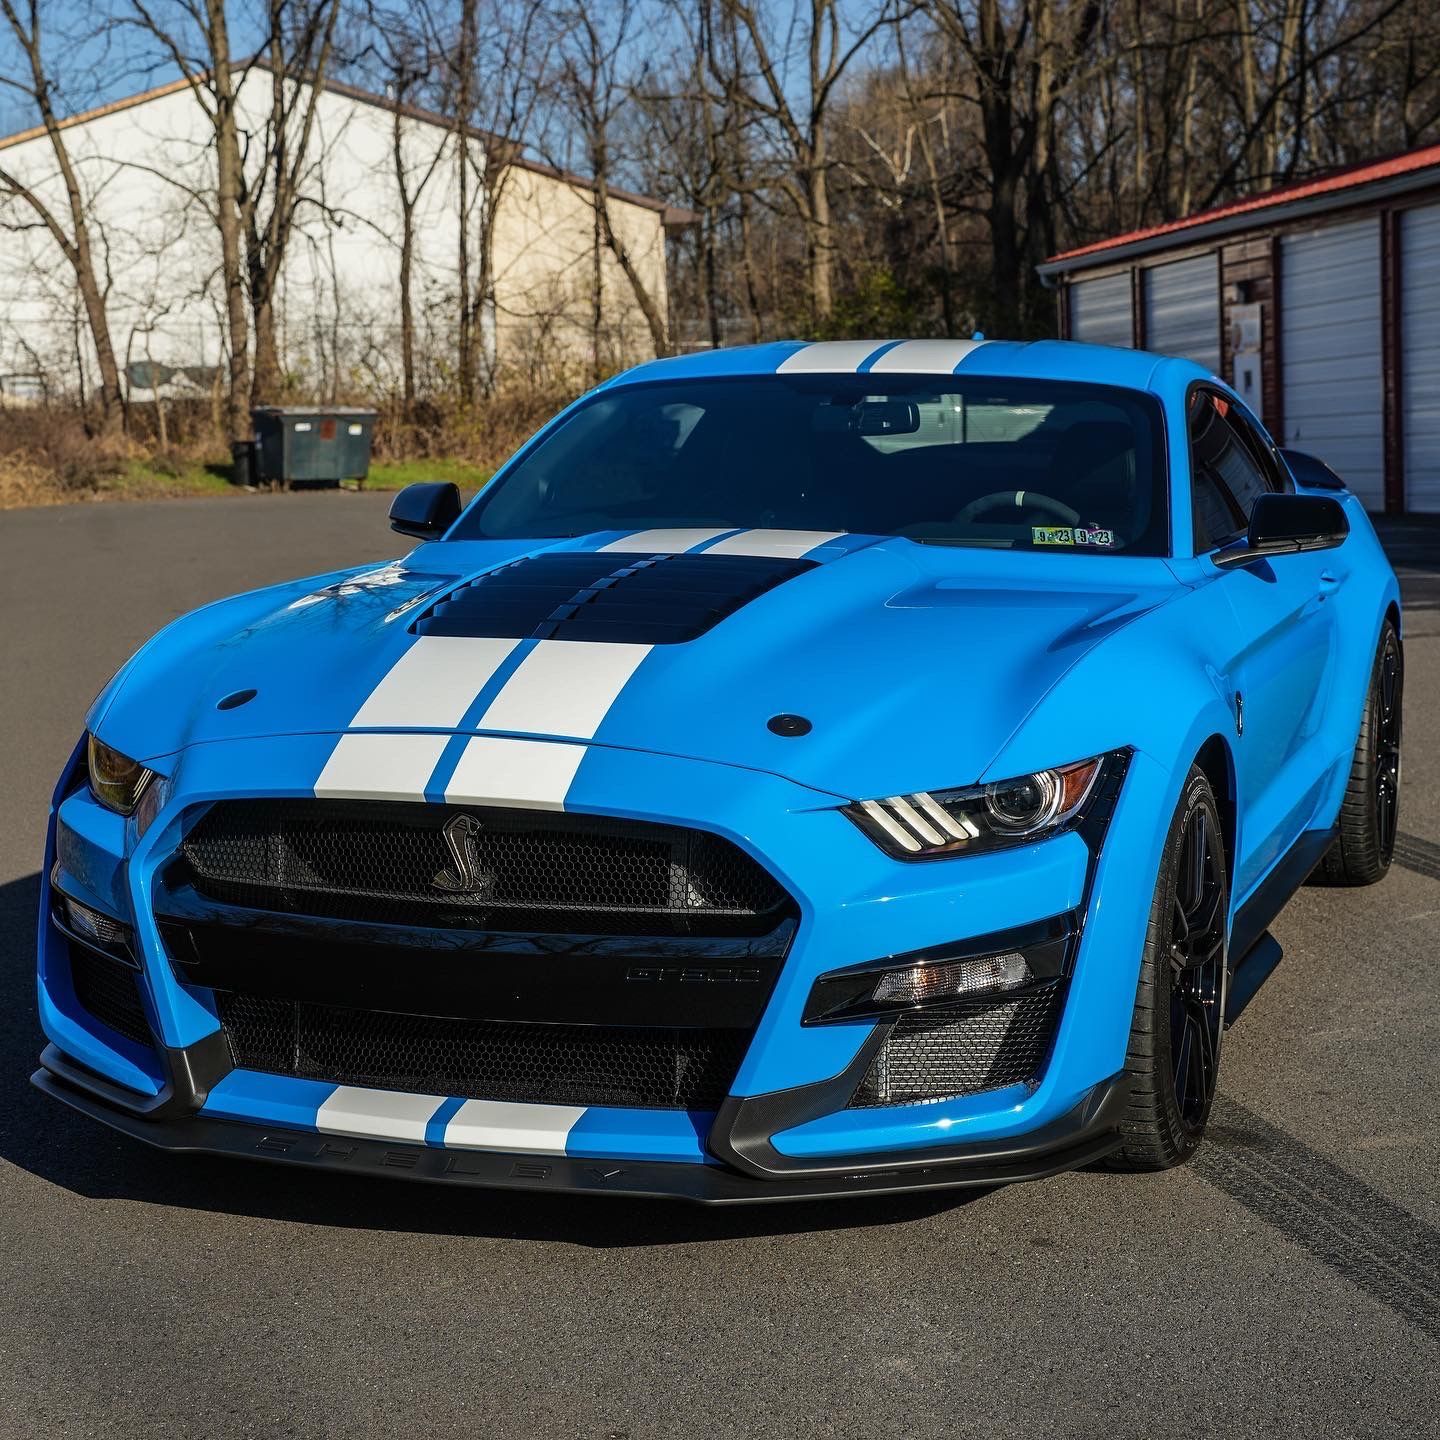 a blue mustang with white stripes is parked in a parking lot